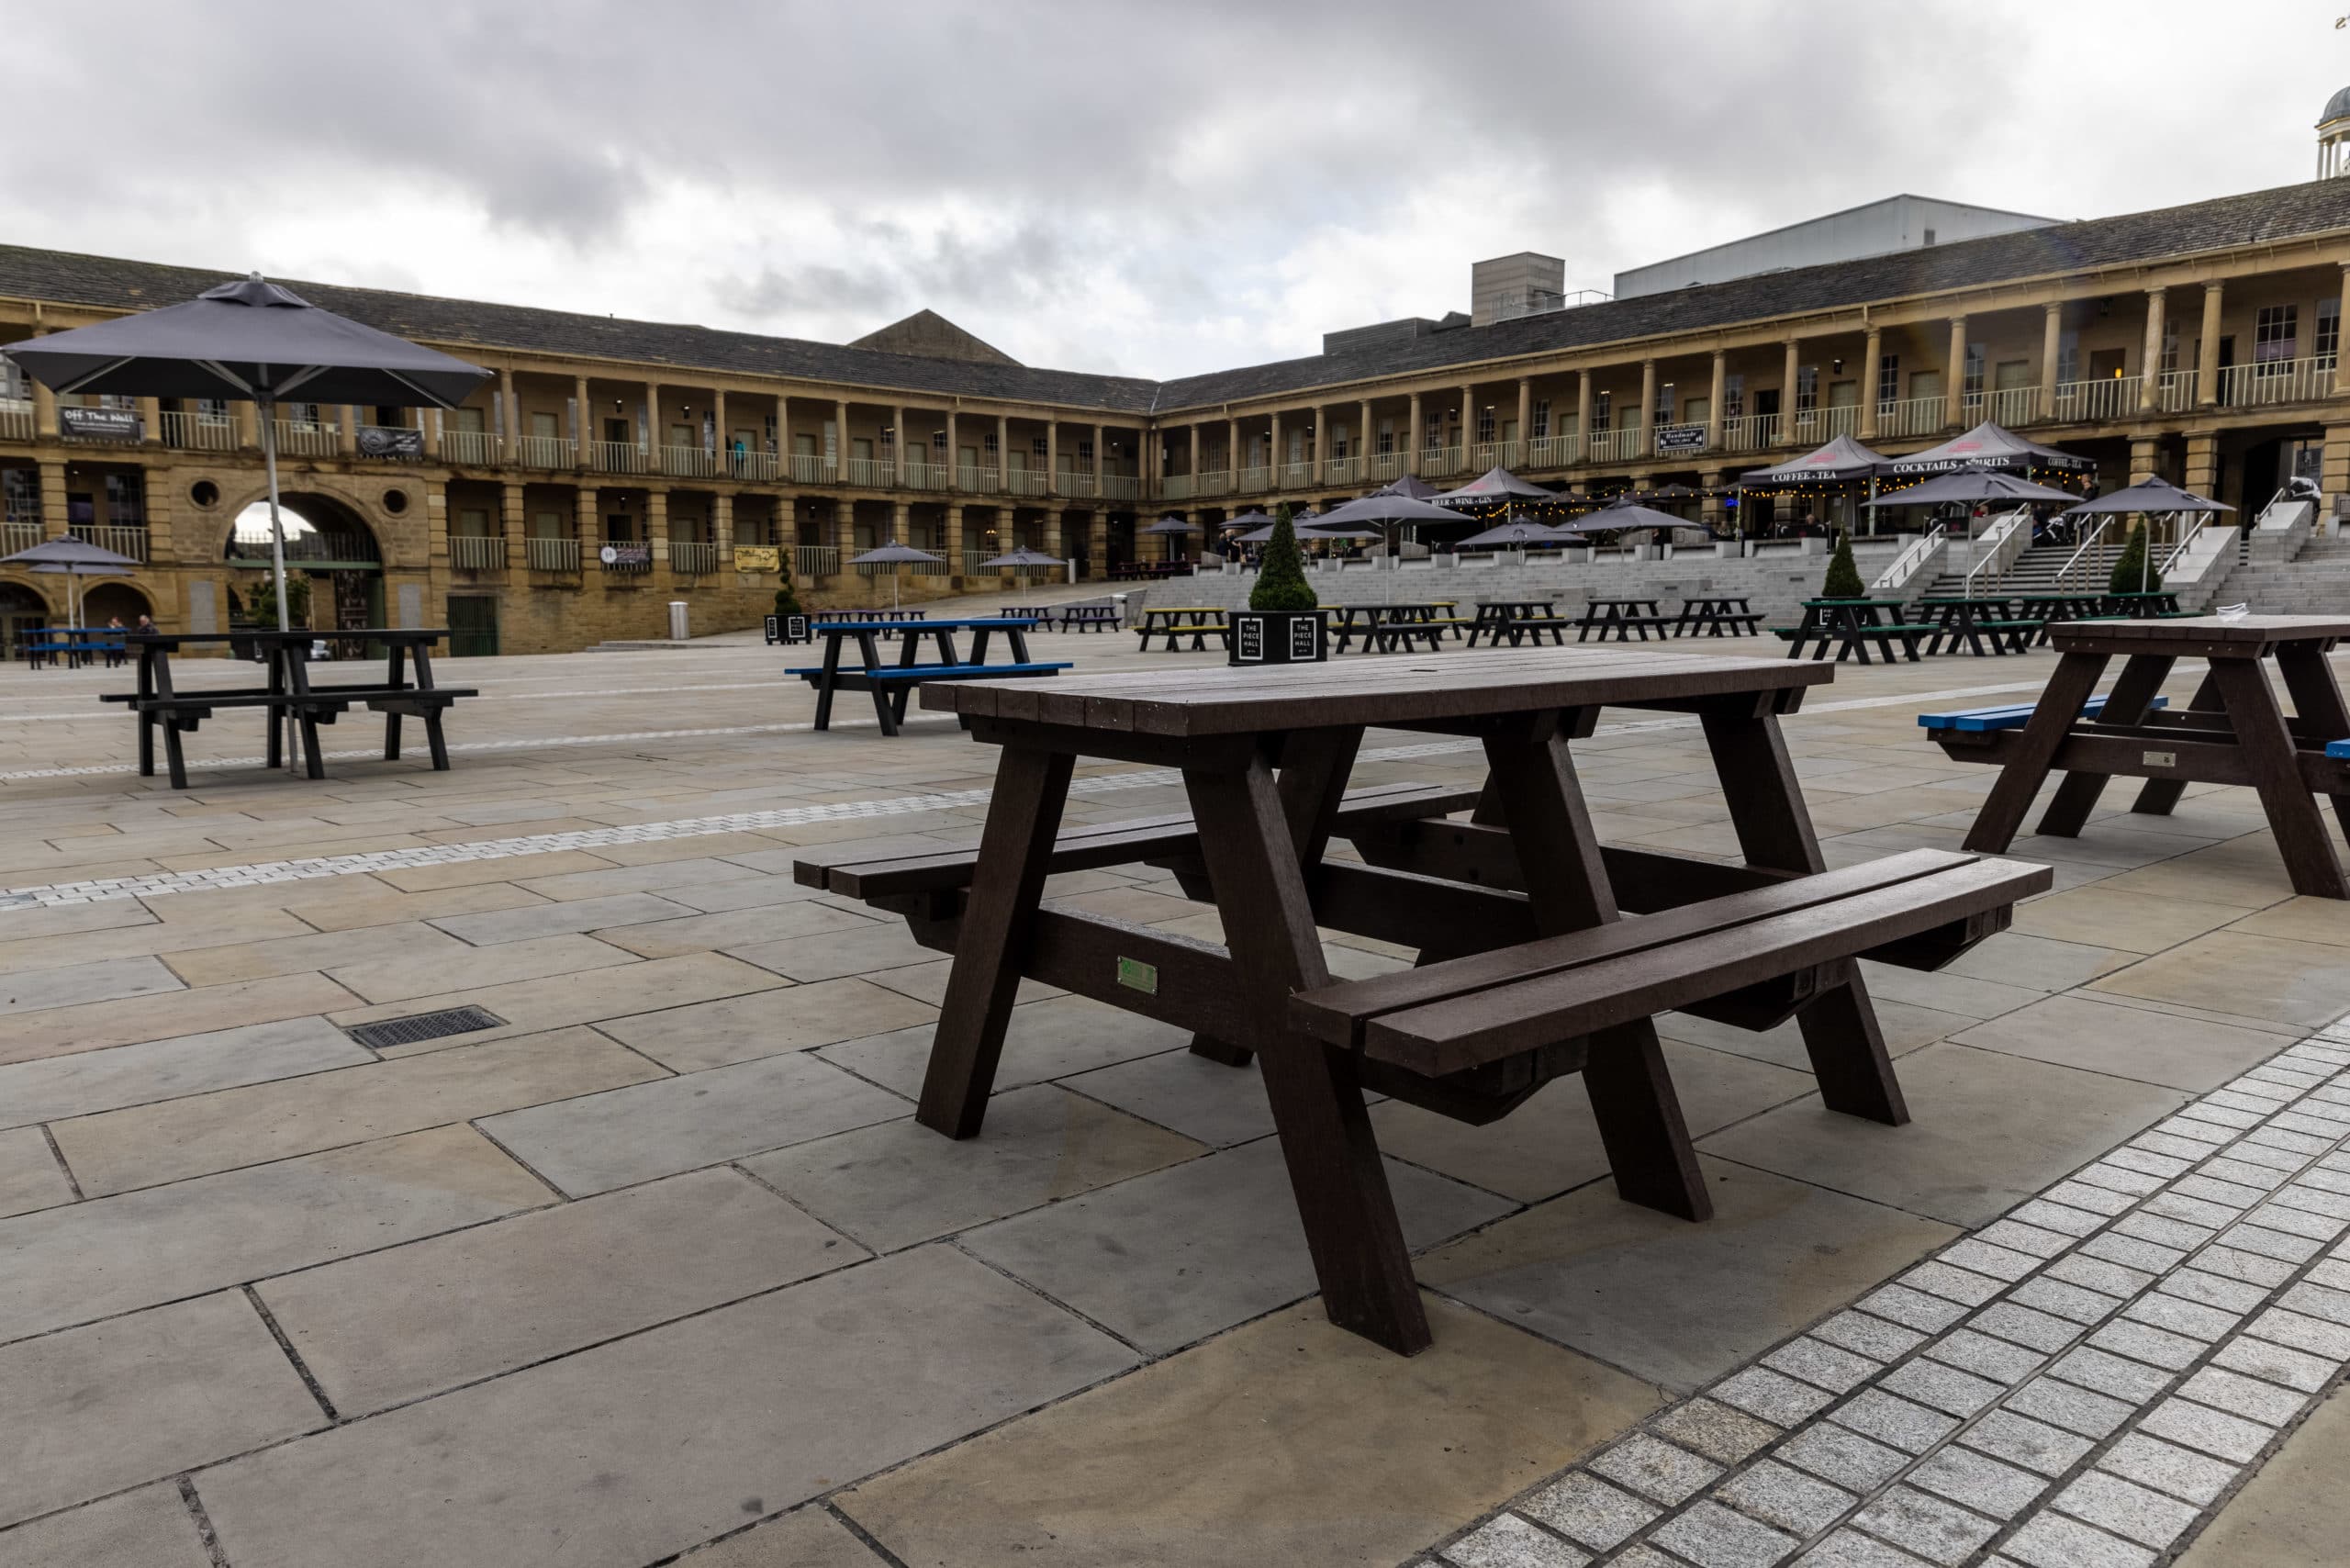 Denholme picnic table, part of the 5 for 4 offer